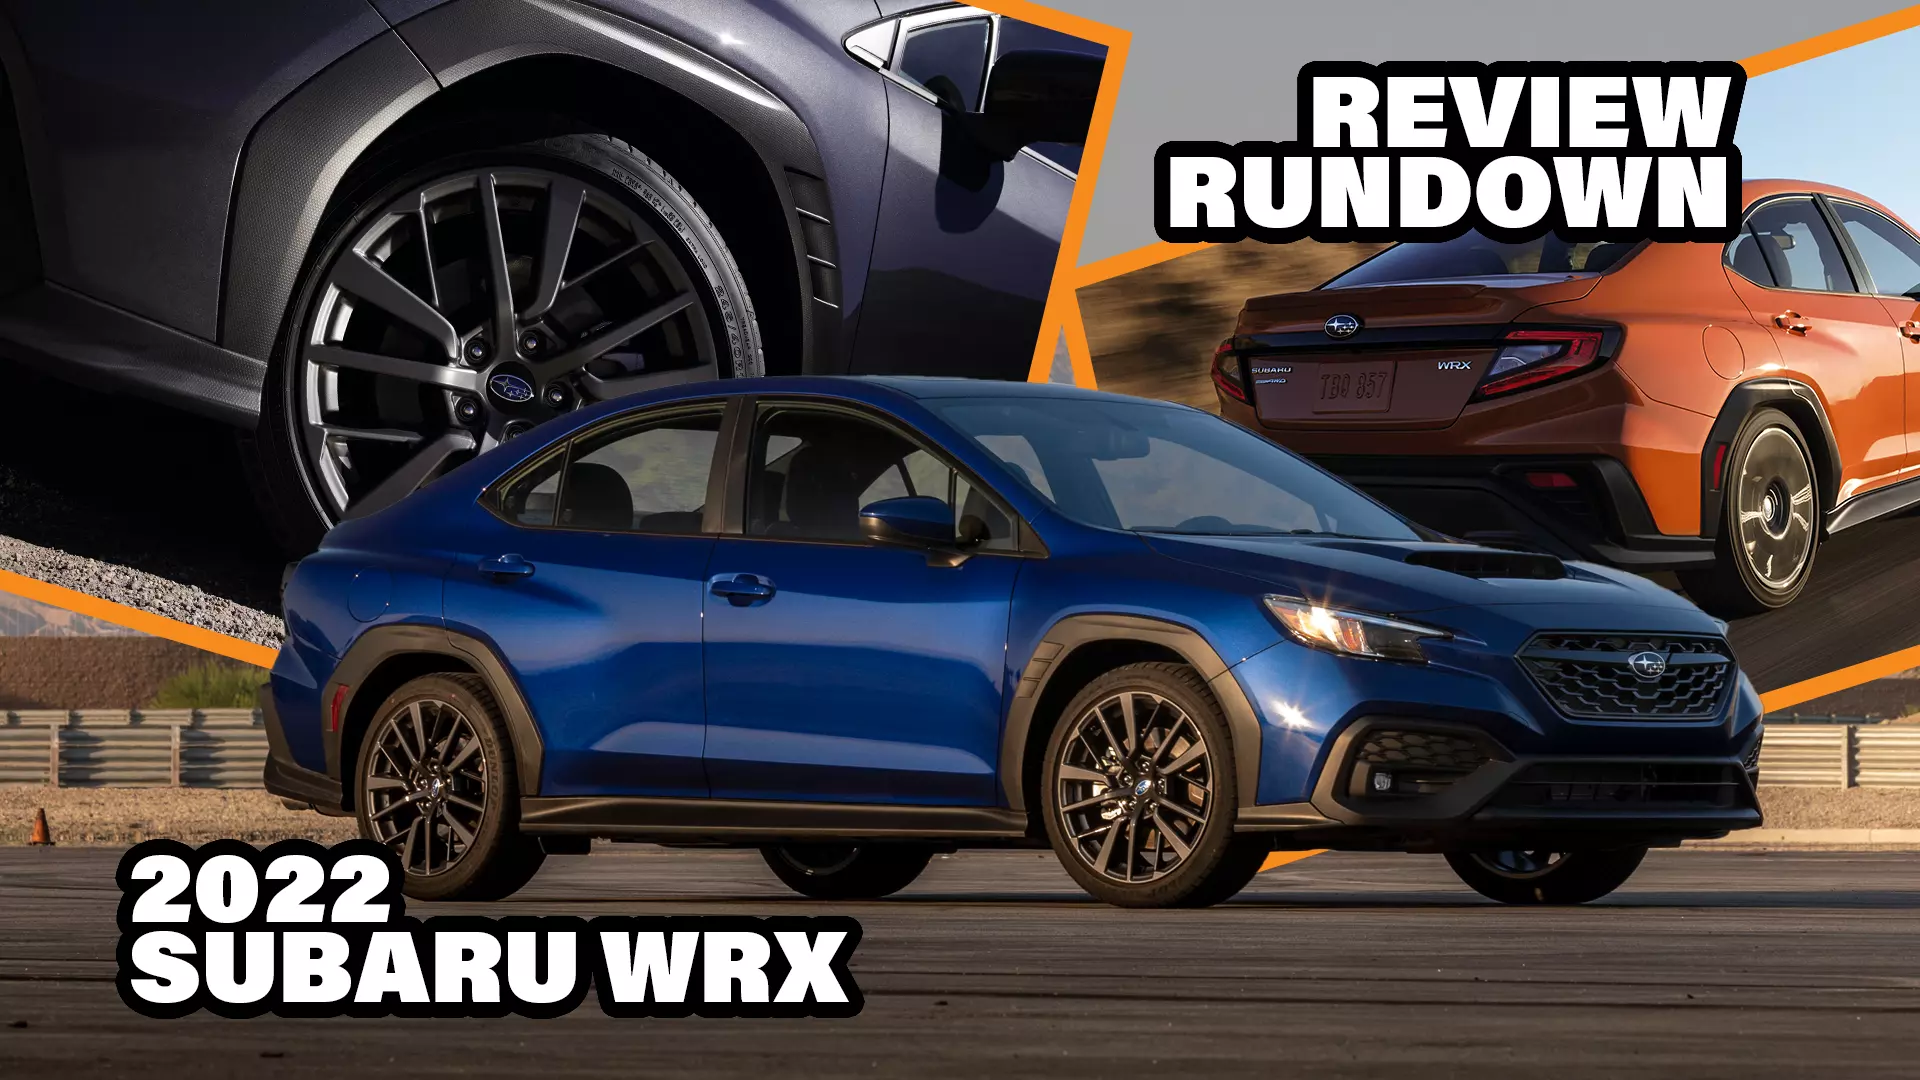 The First 2022 Subaru WRX Reviews Are Mixed